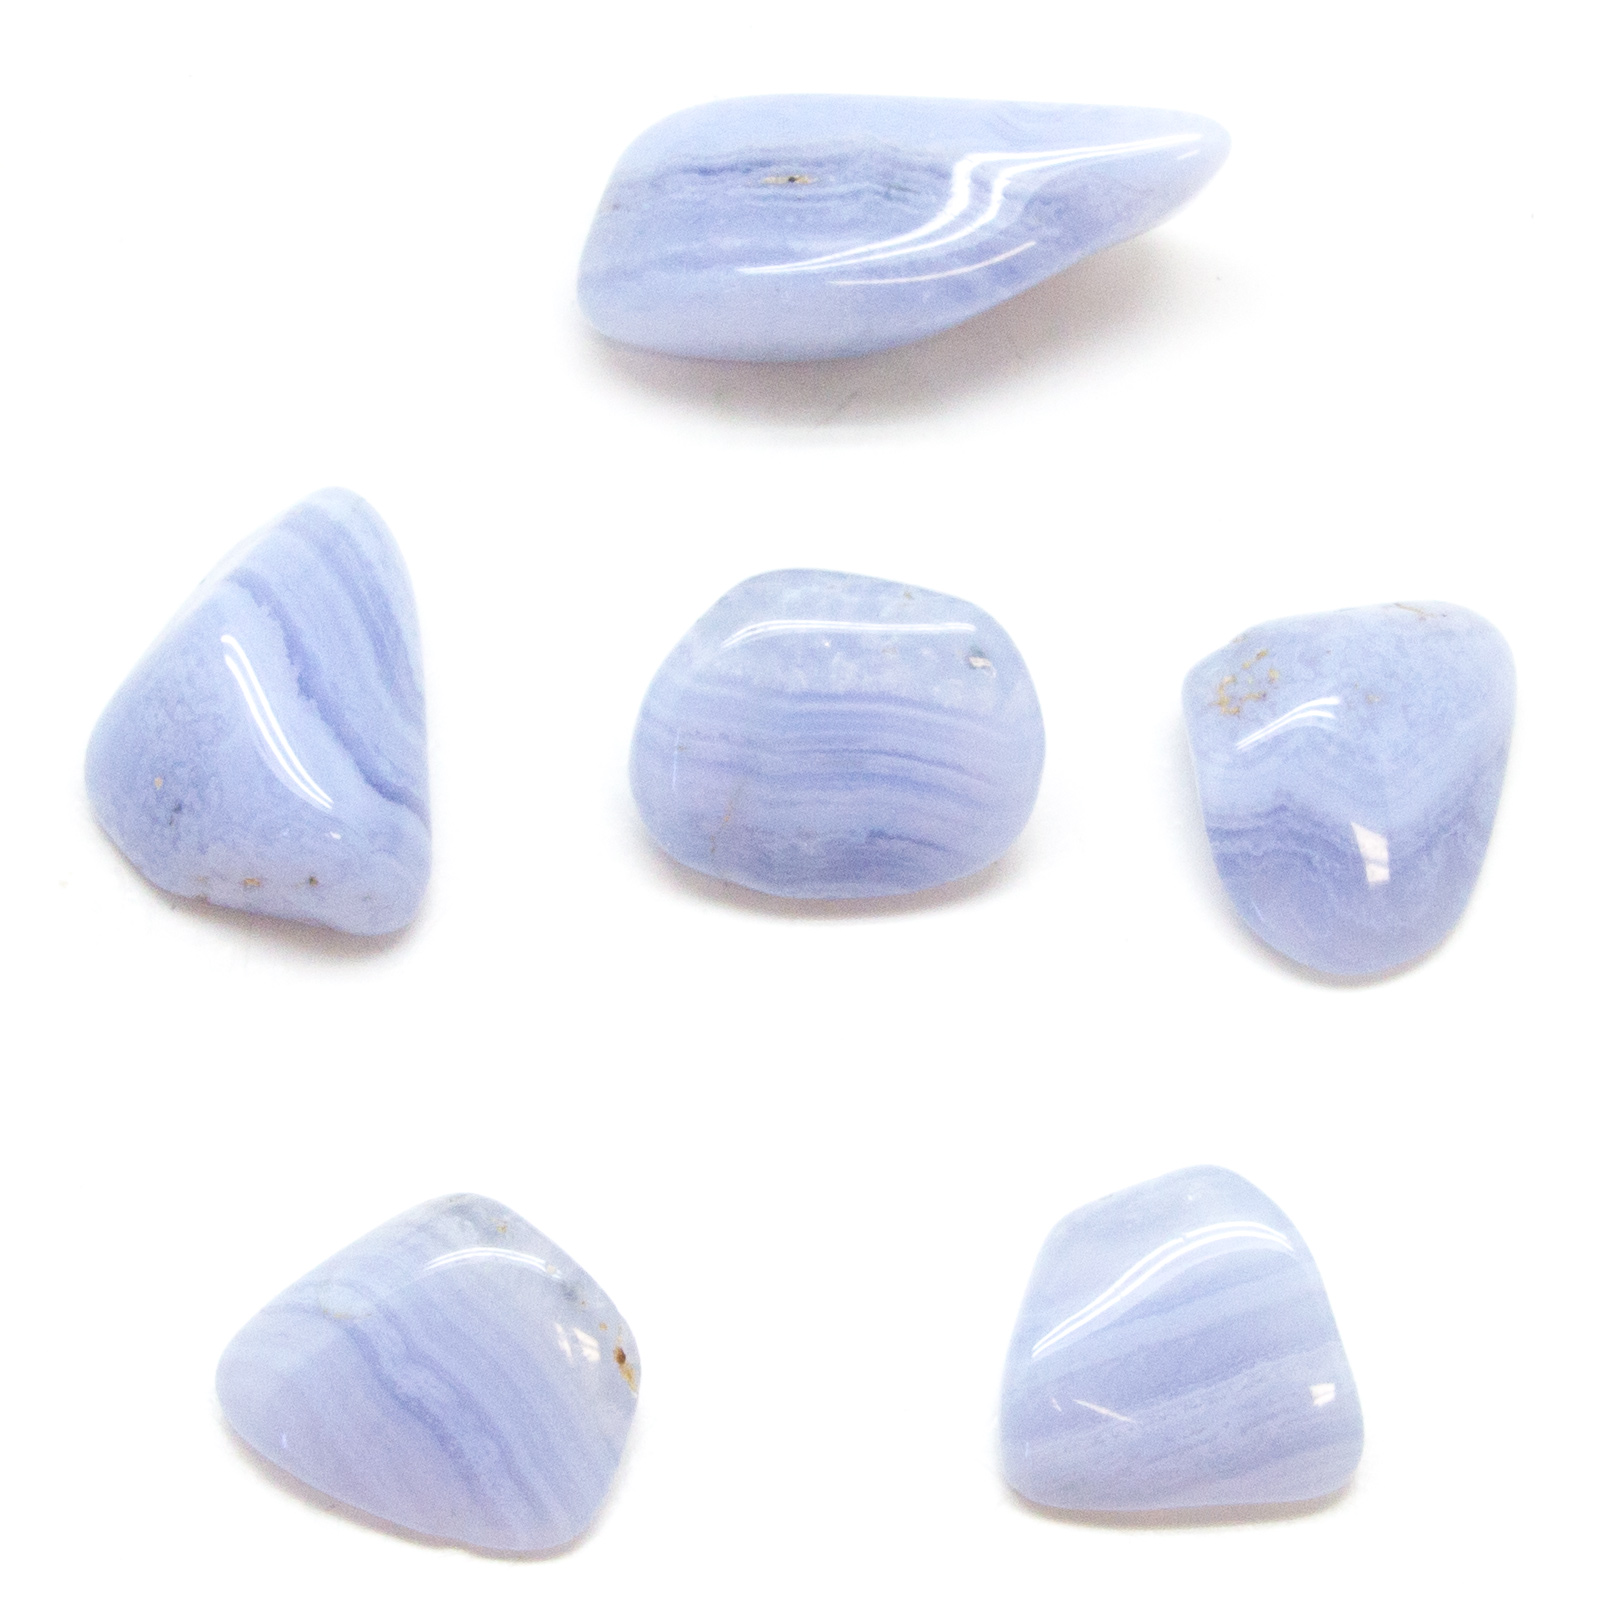 Polished Blue Lace Agate Healing Crystals